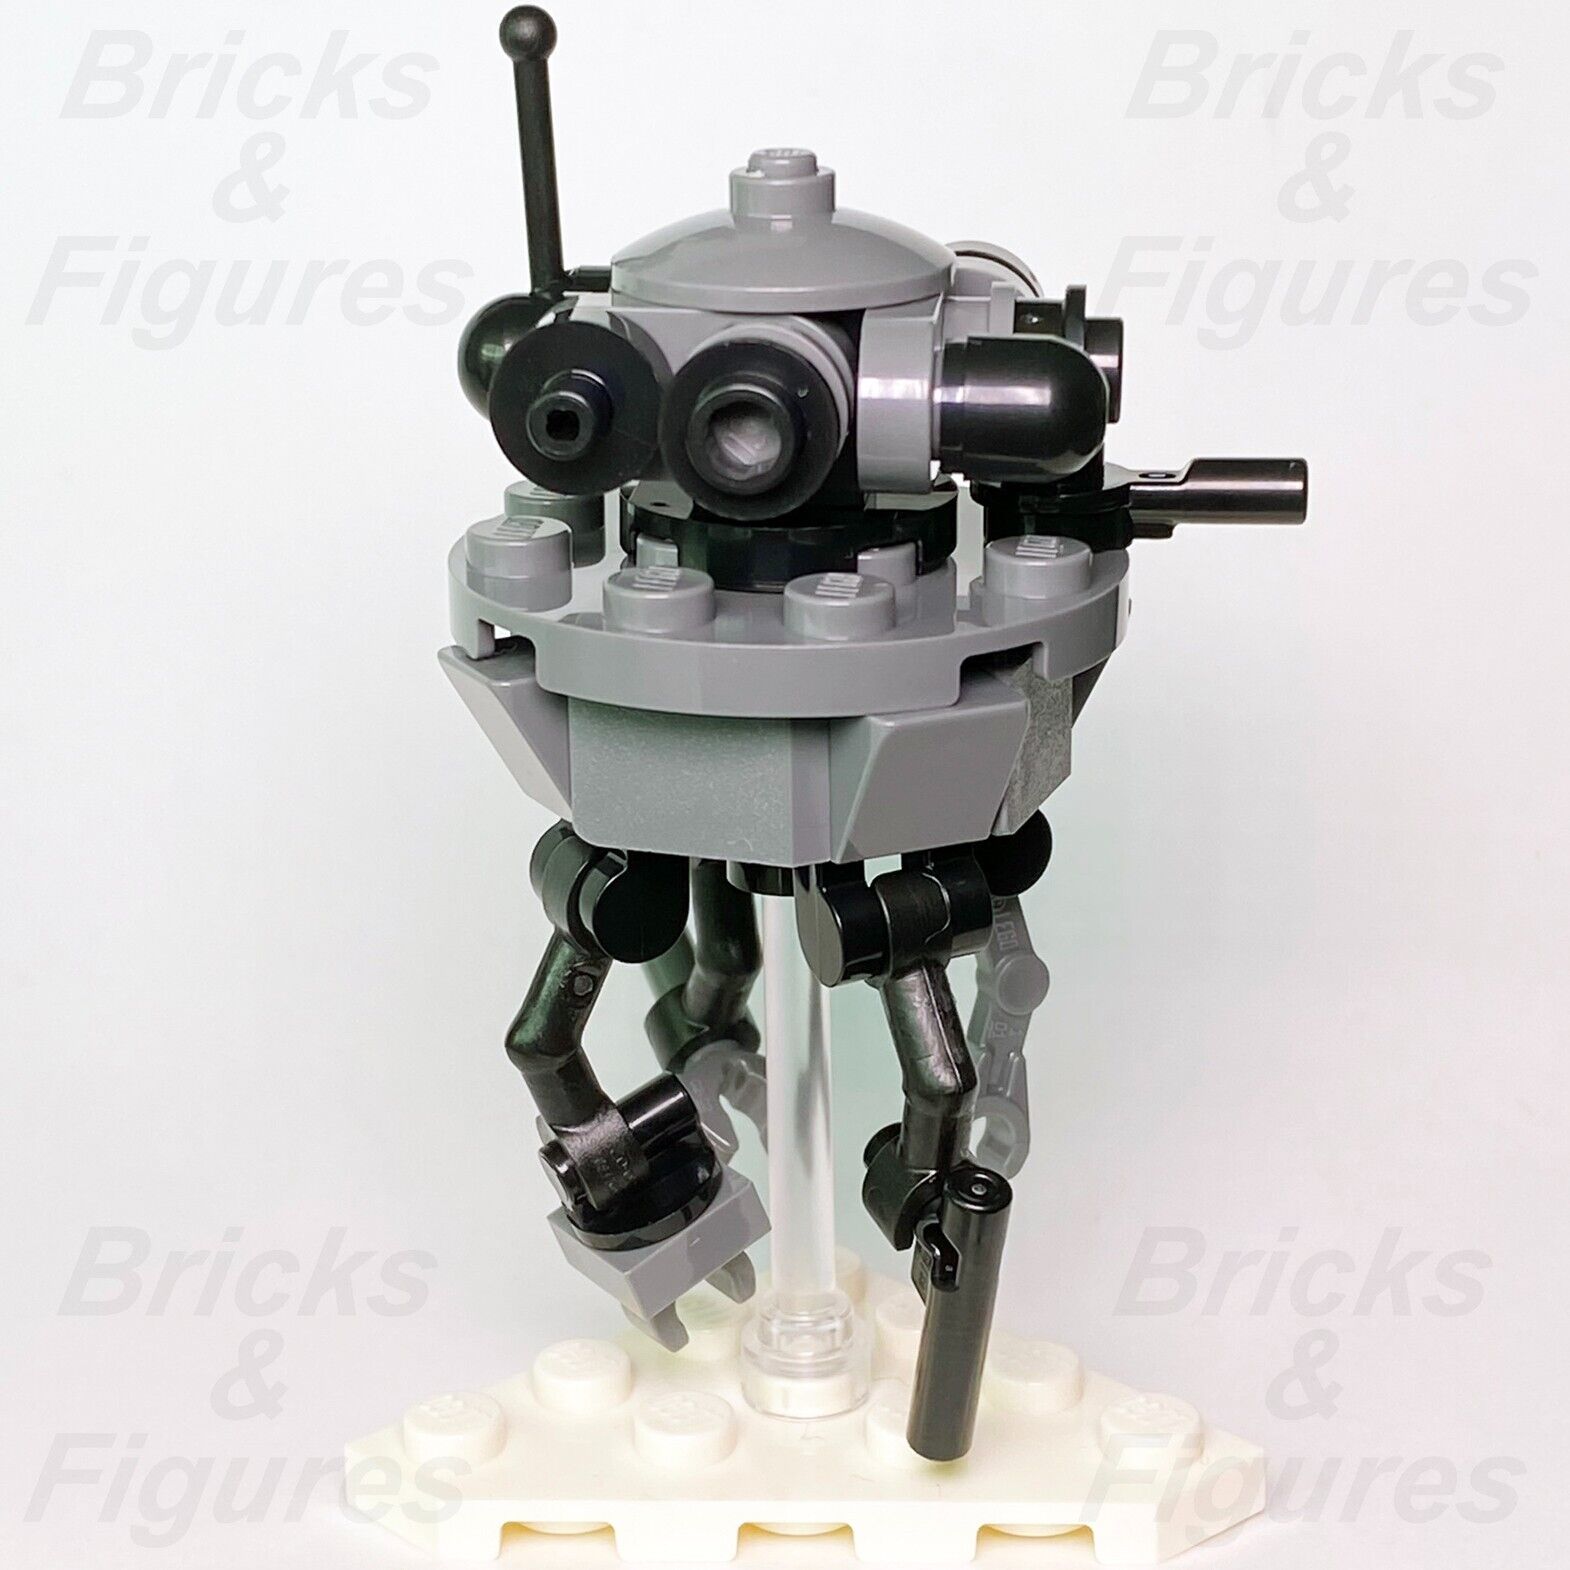 LEGO® Star Wars Imperial Probe Droid Minifigure with Stand 75322 sw1190 Hoth 1